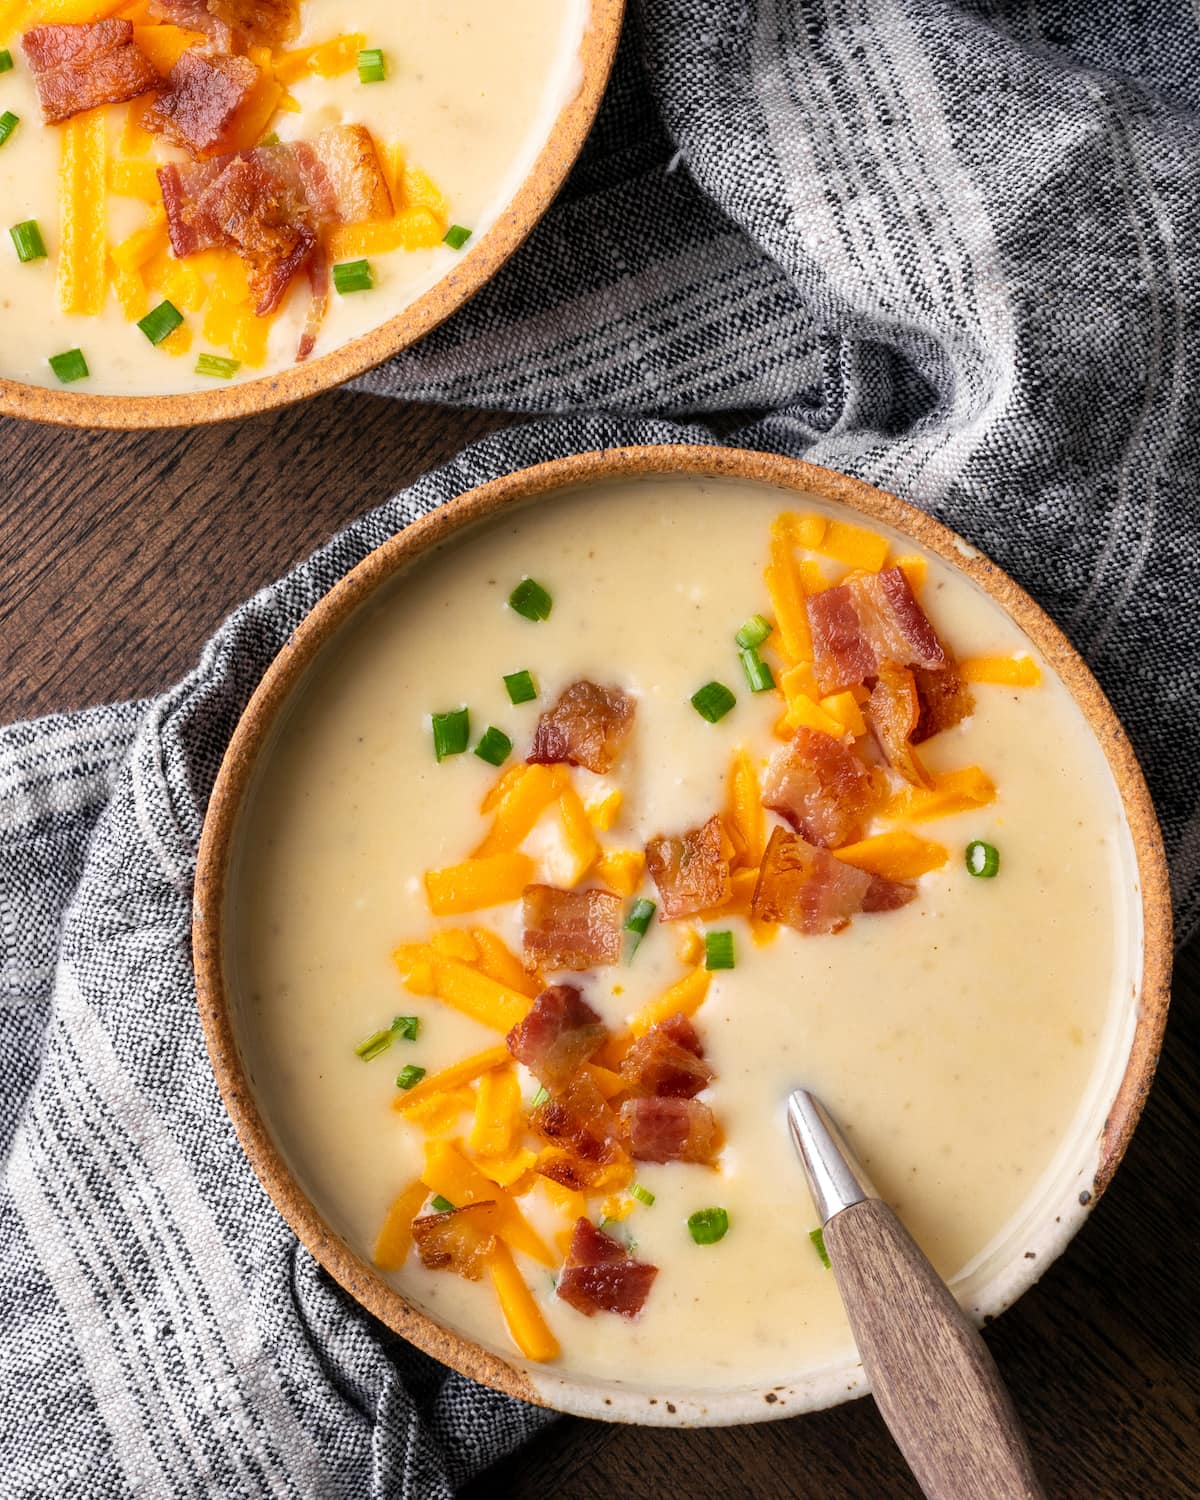 Top view of two side-by-side bowls of loaded Instant Pot potato soup topped with shredded cheese, bacon bits, and chives.